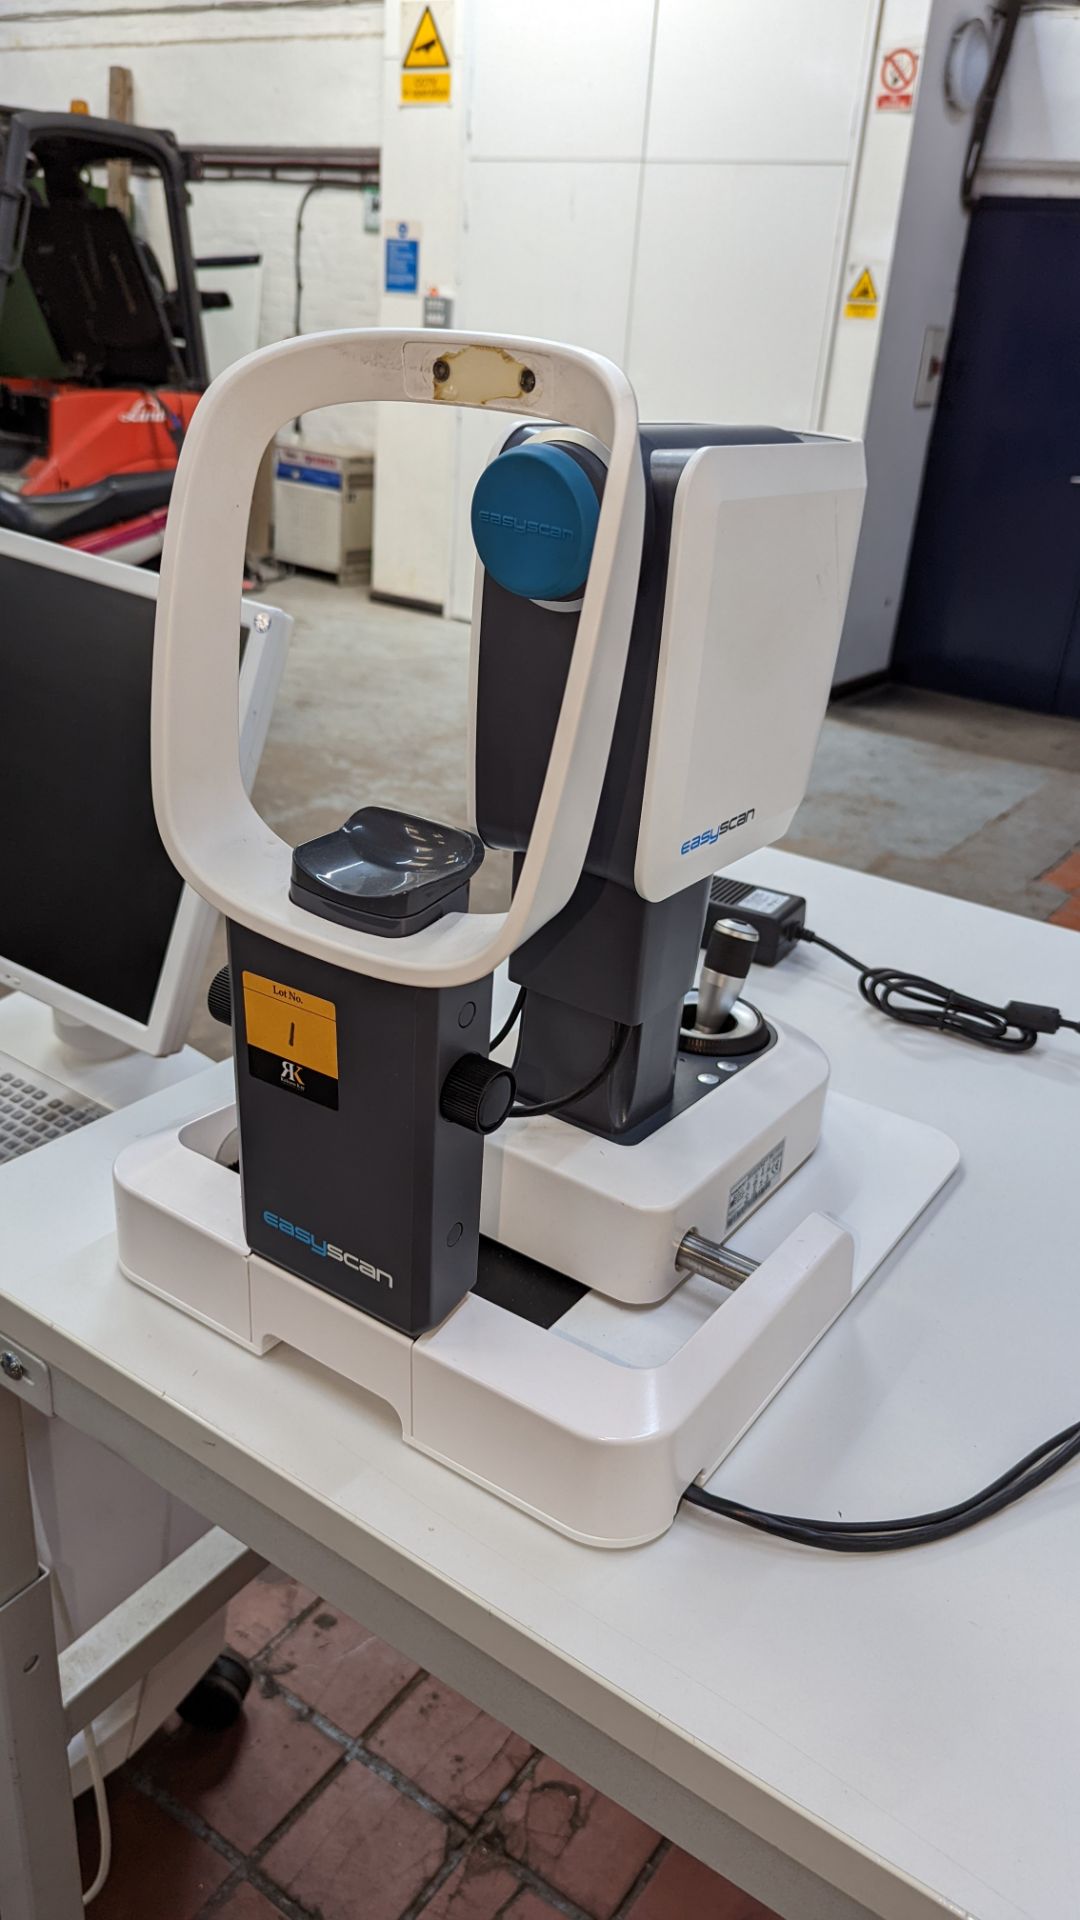 EasyScan digital retinal imaging scanner, including HP laptop computer and Topcon ATE-600 motorized - Image 16 of 42